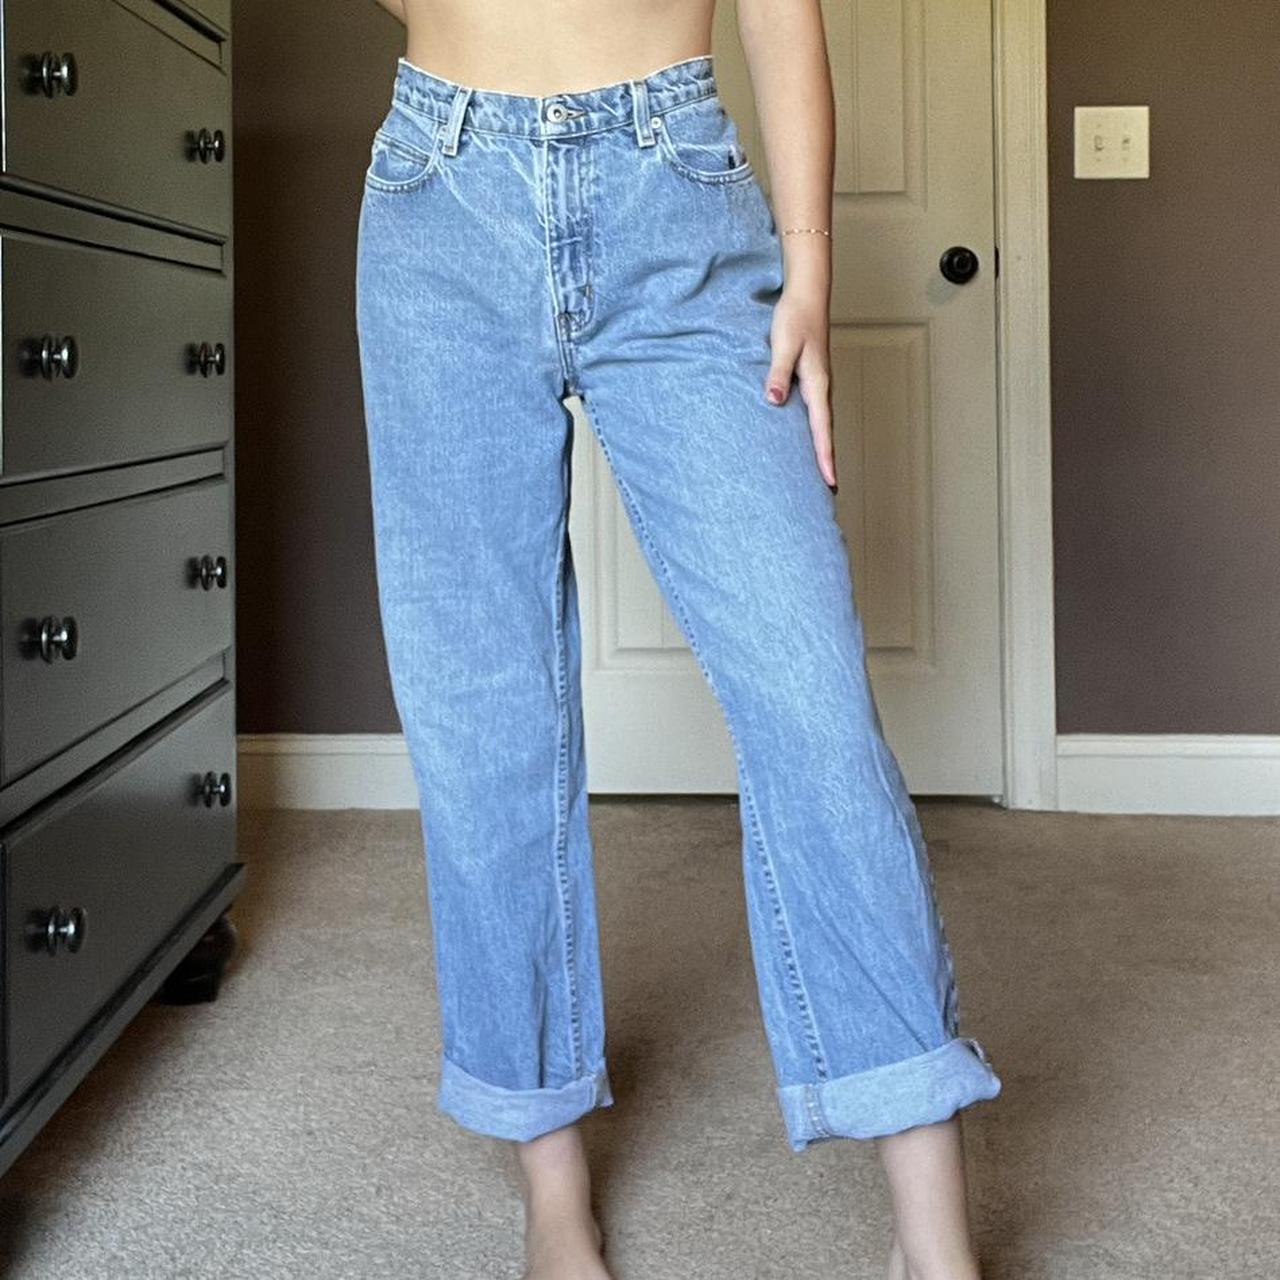 VINTAGE FADED GLORY HIGH-WAISTED JEANS🎀 •size 10p... - Depop